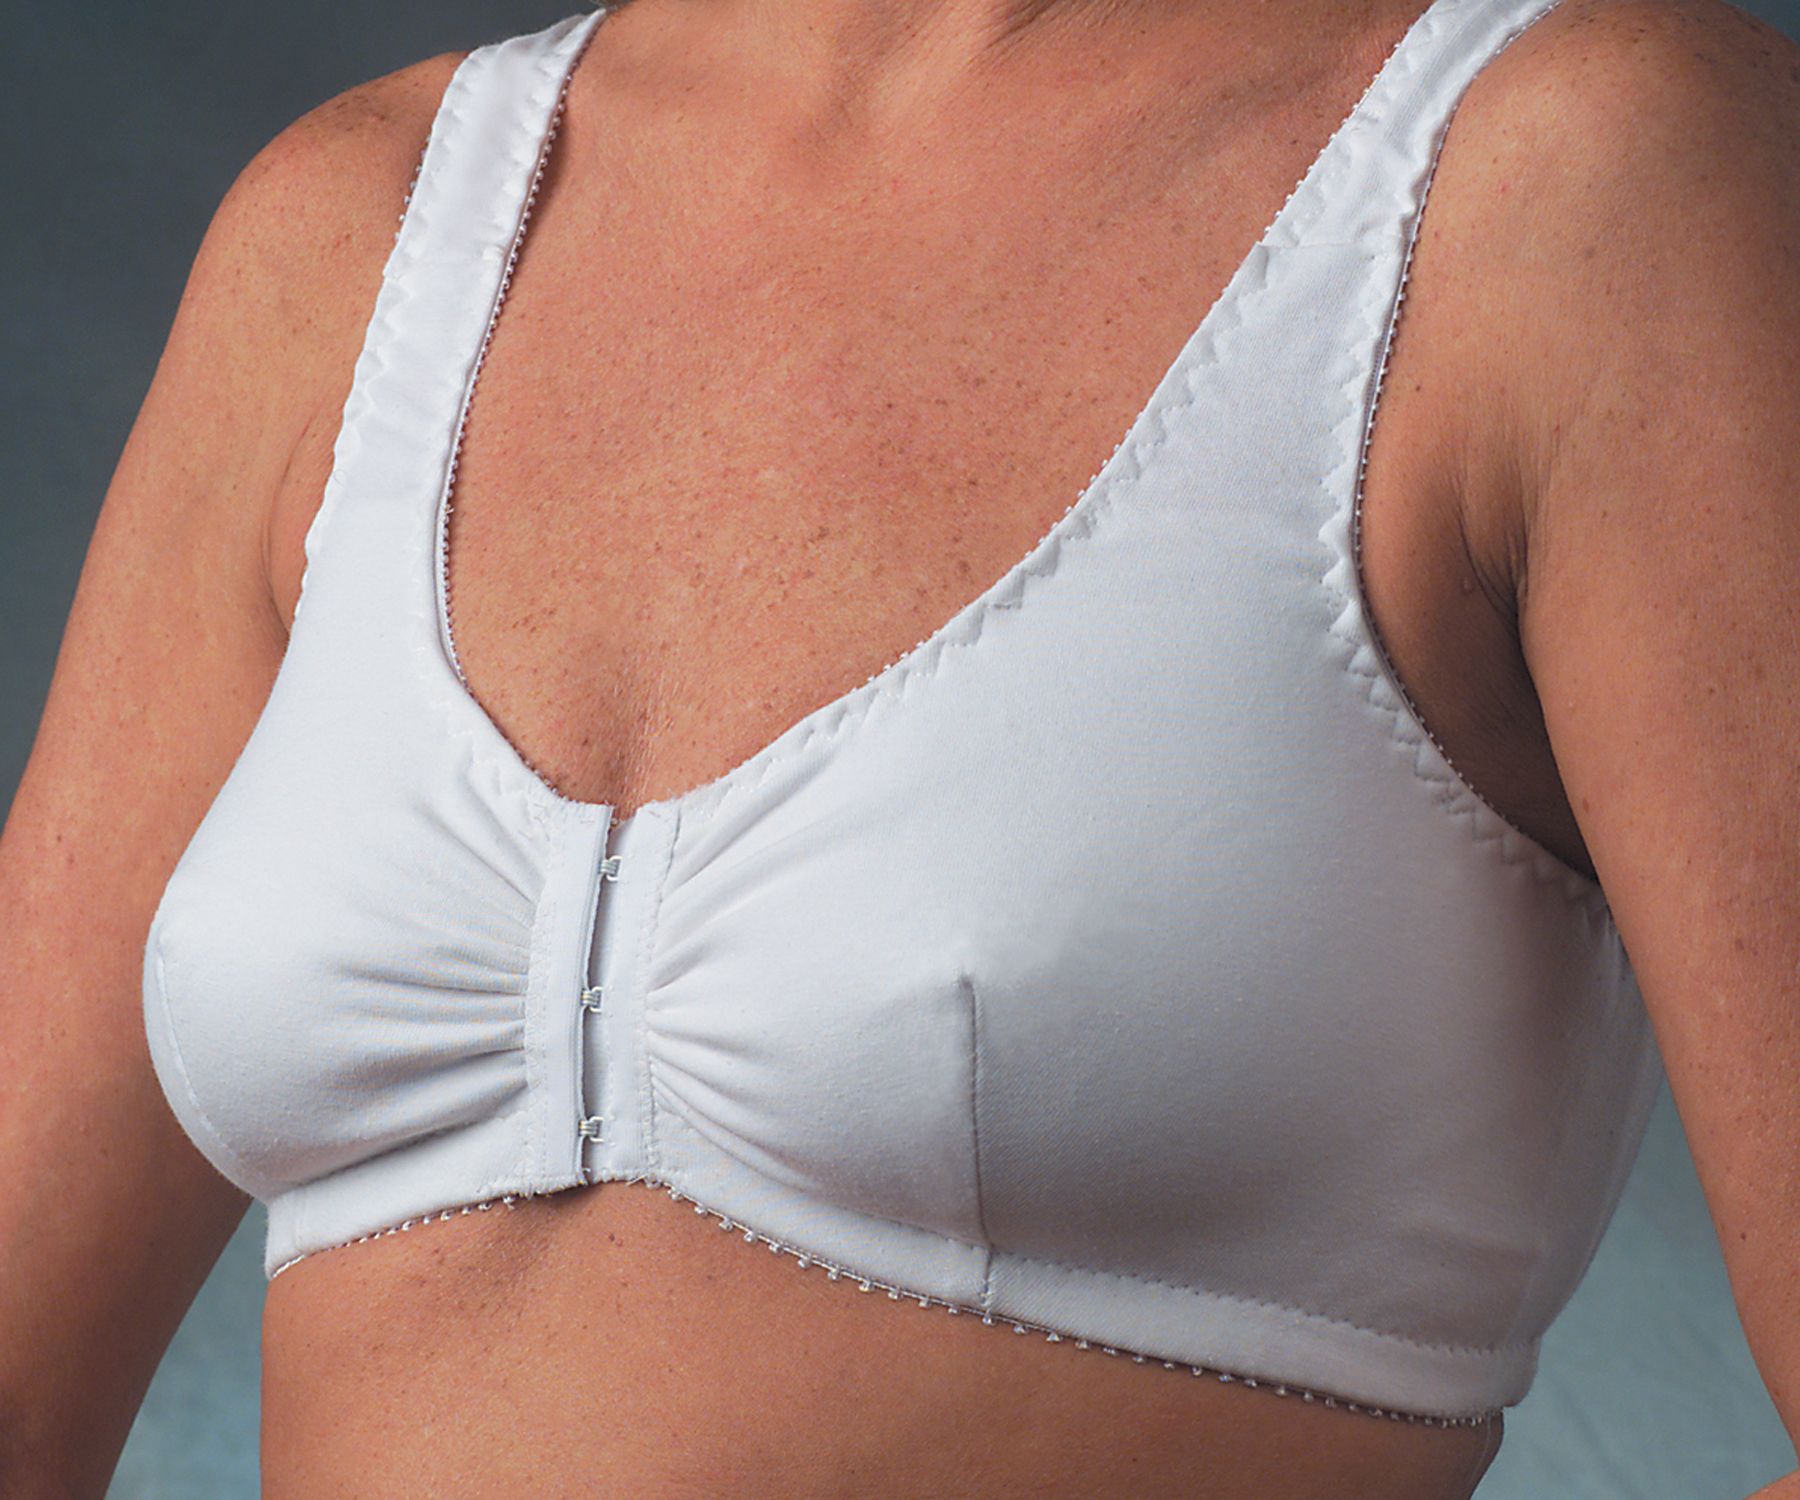 https://www.womanspersonalhealth.com/files/styles/uc_product_full/public/nearly-me-cotton-front-closure-leisure-bra_0.jpg?itok=dyD7oaX6